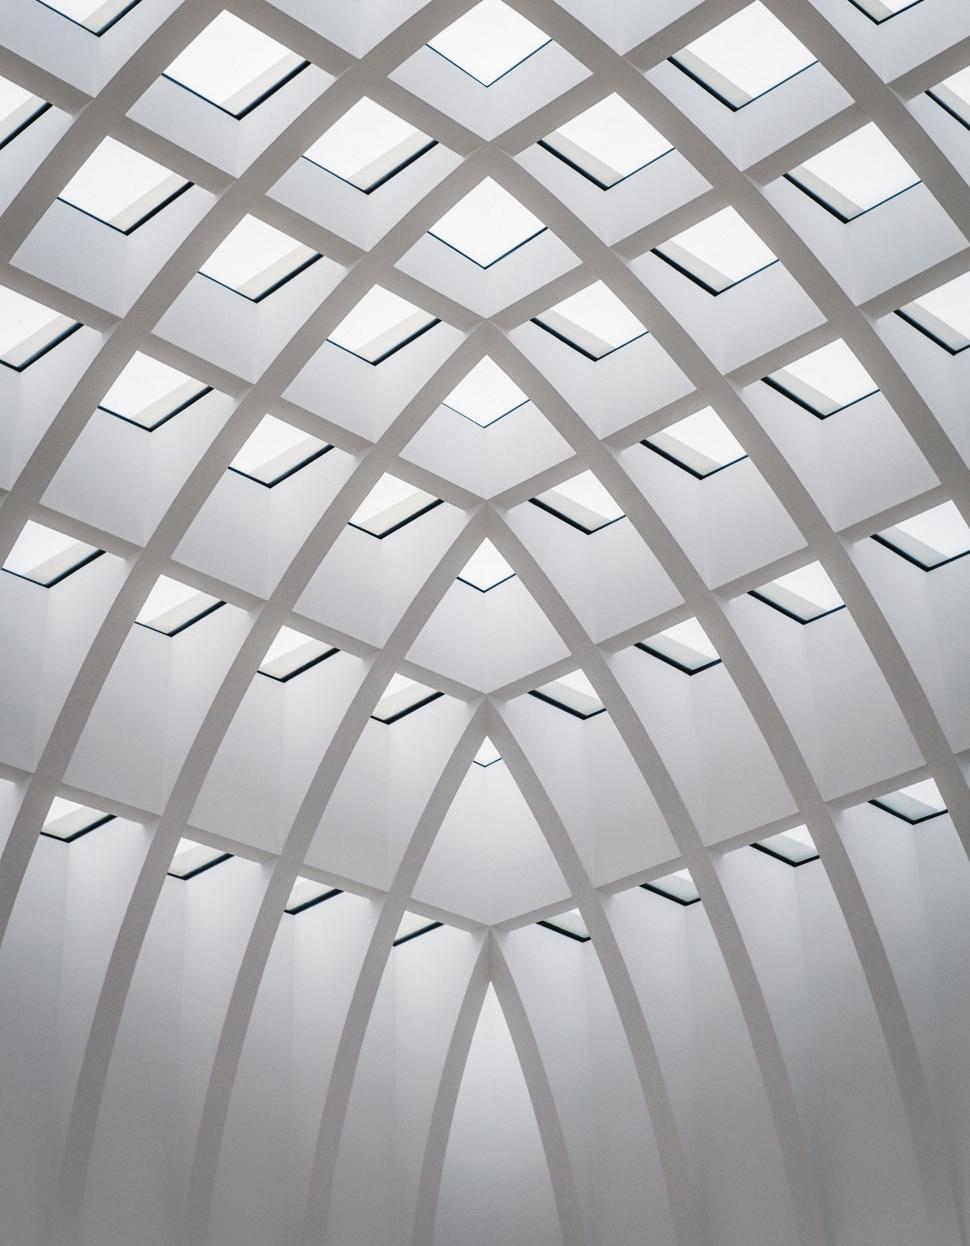 Free Image of White Room With Square Ceiling 